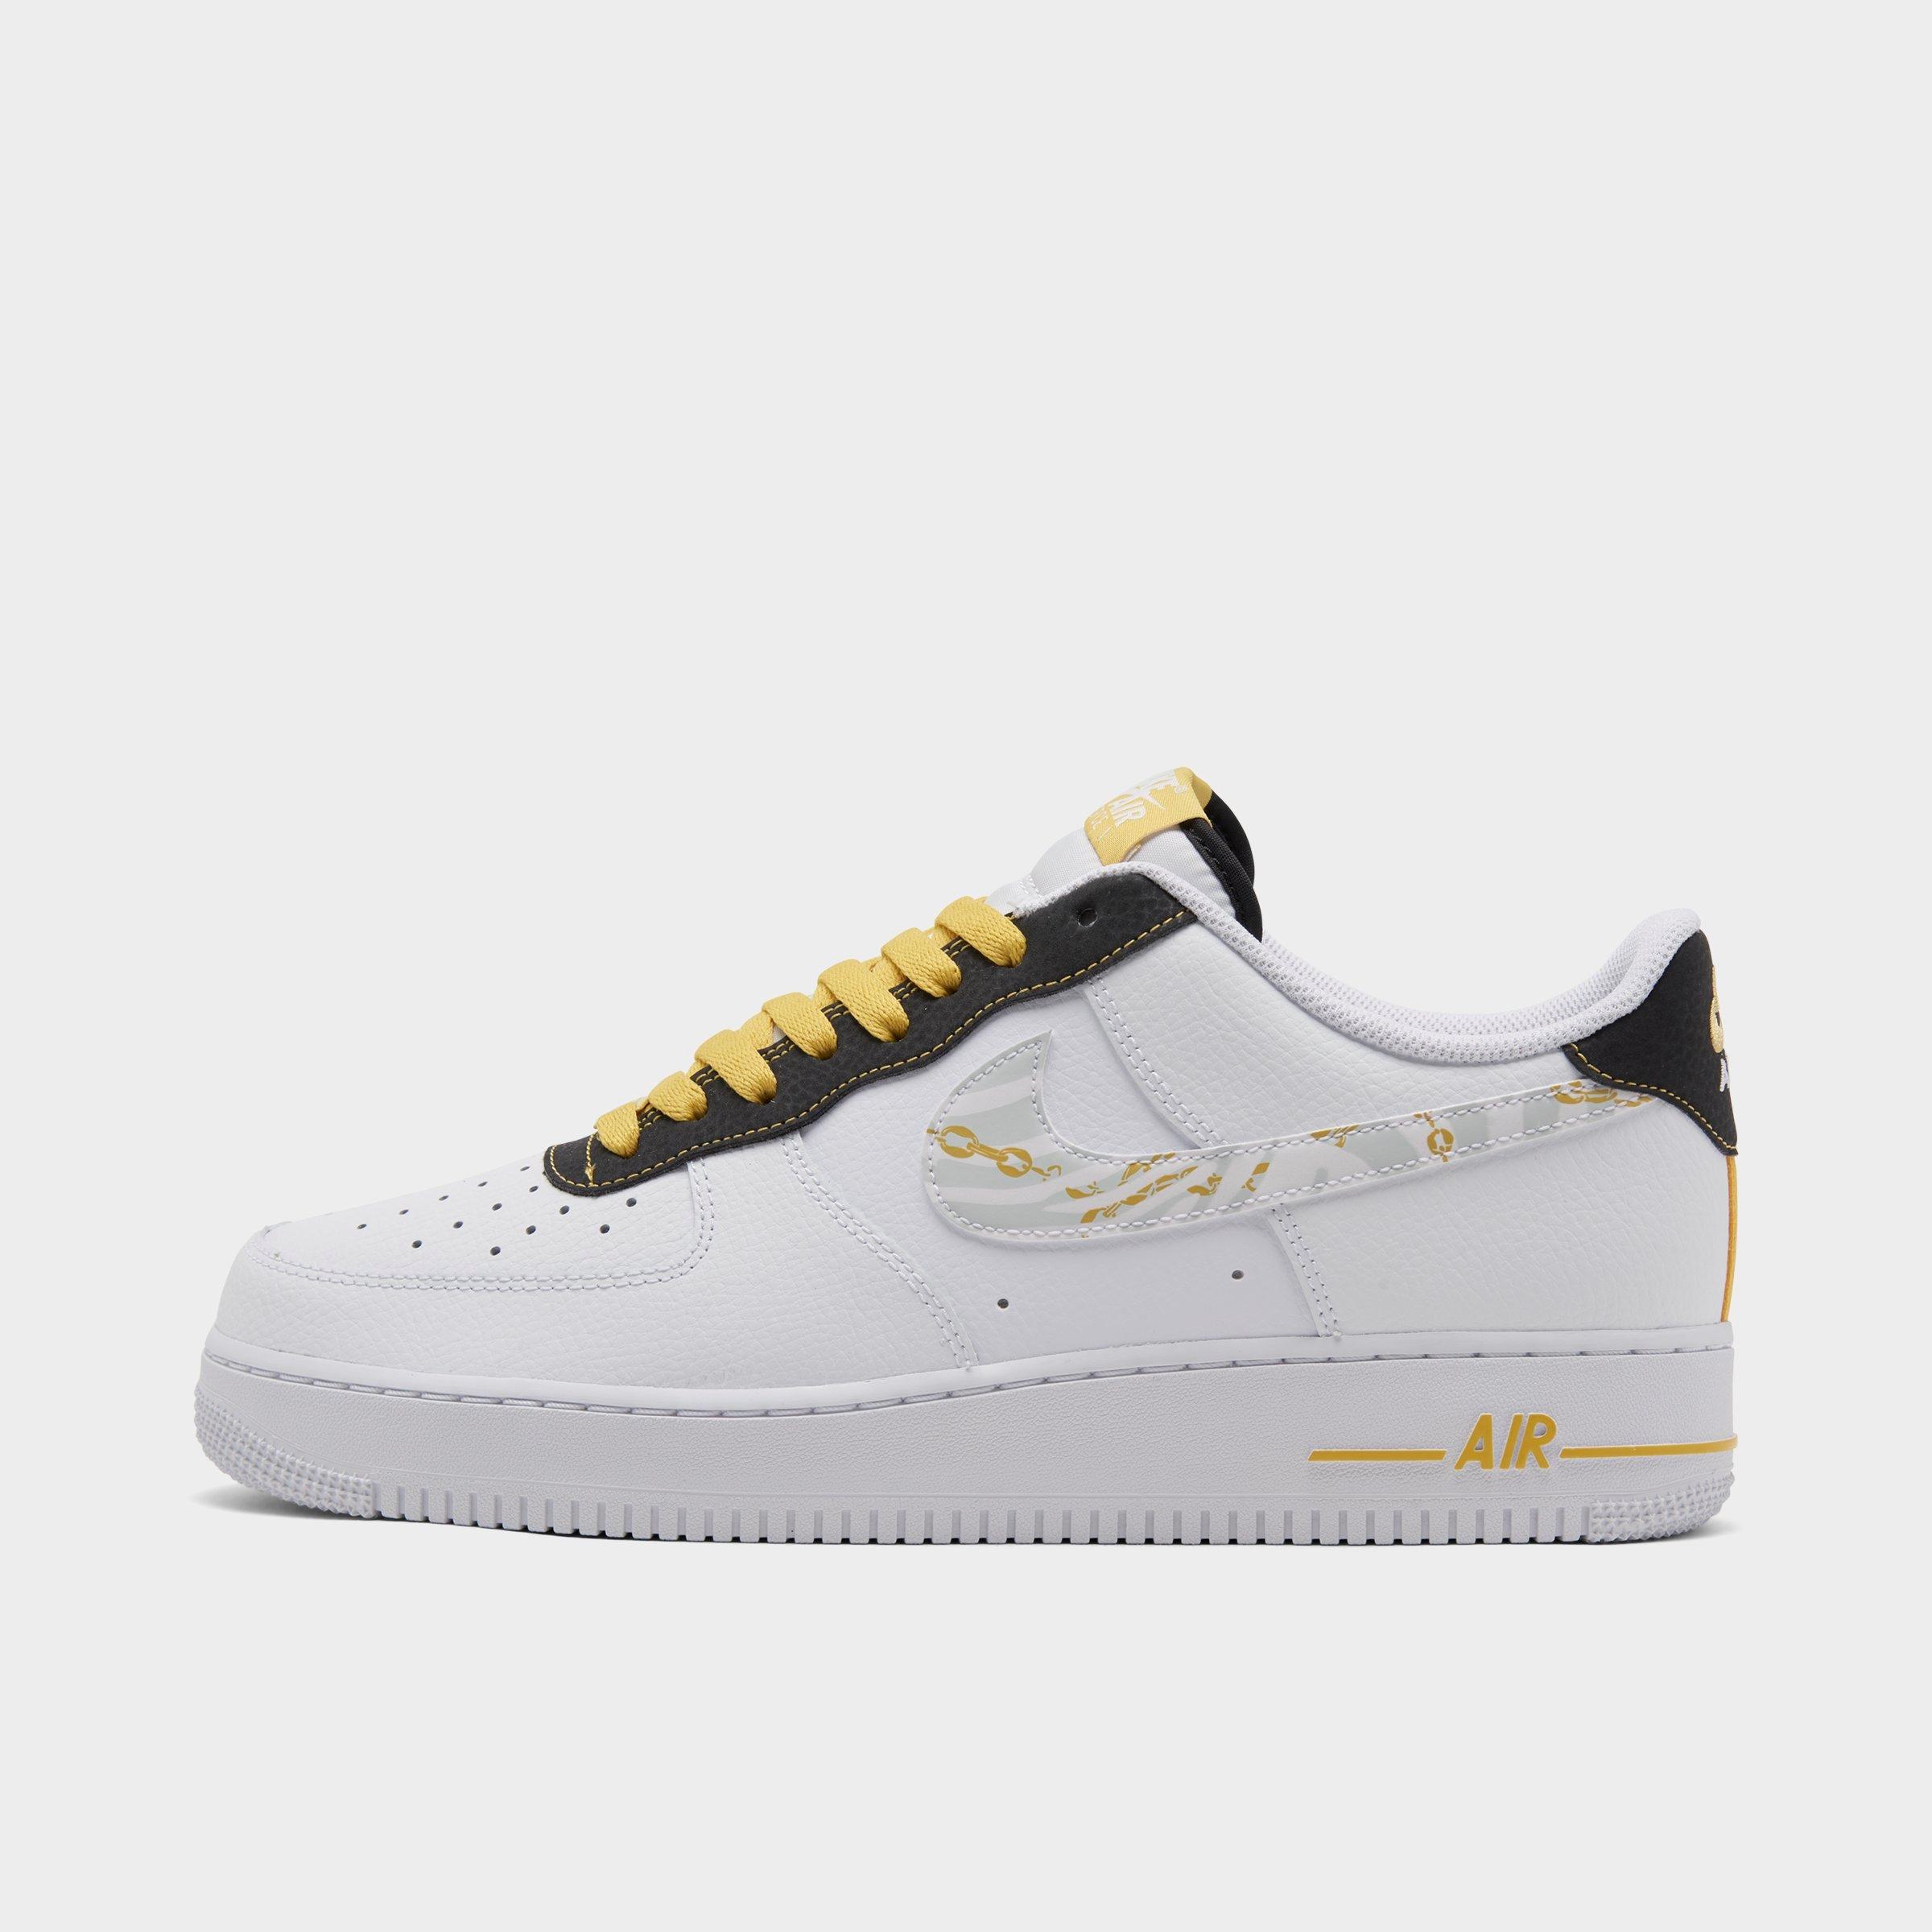 nike air force 1 lv8 size 7.5